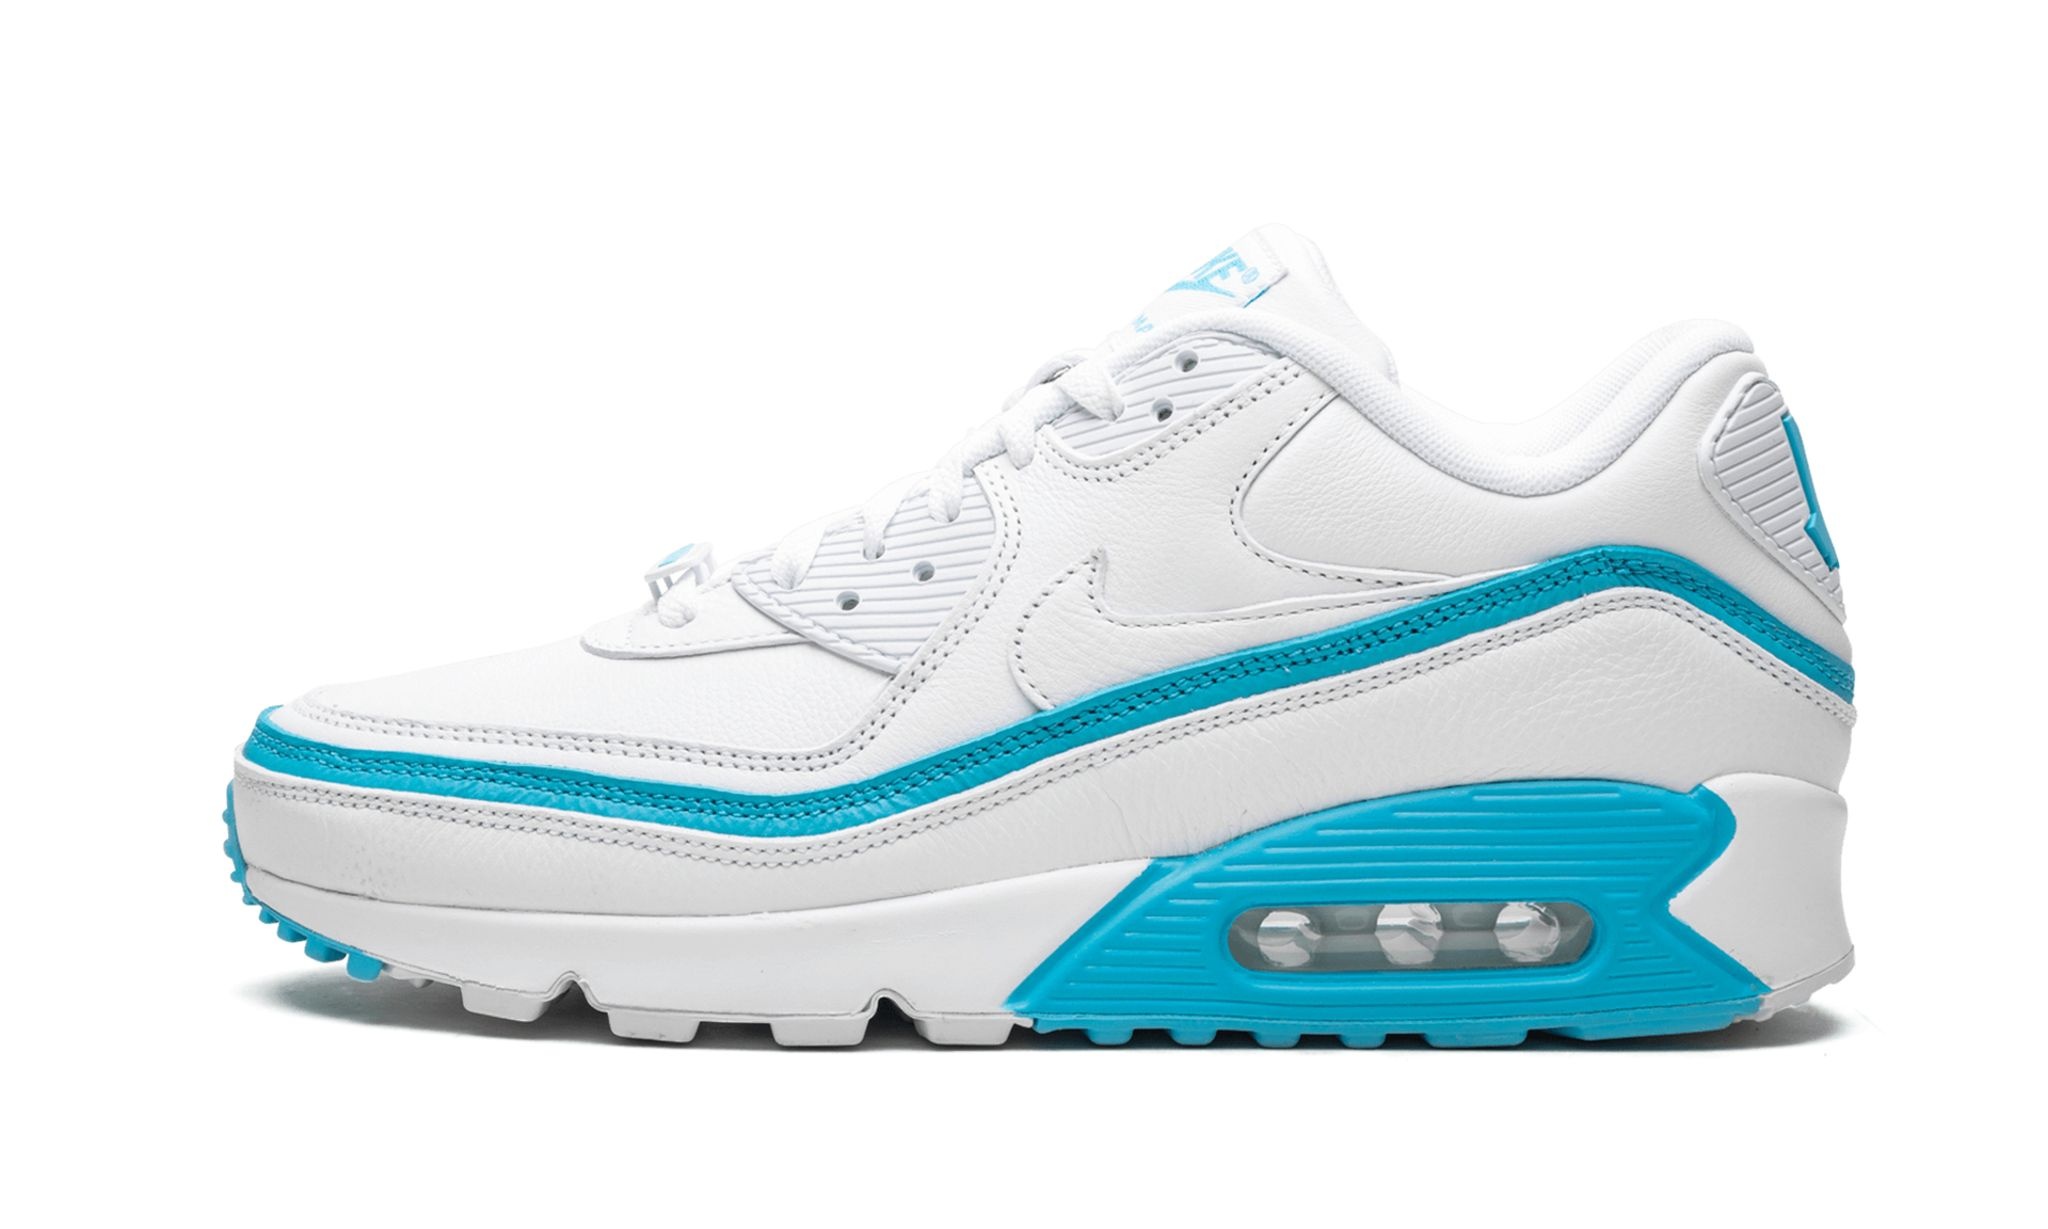 Air Max 90 / UNDFTD "Undefeated - White/Blue Fury" - 1